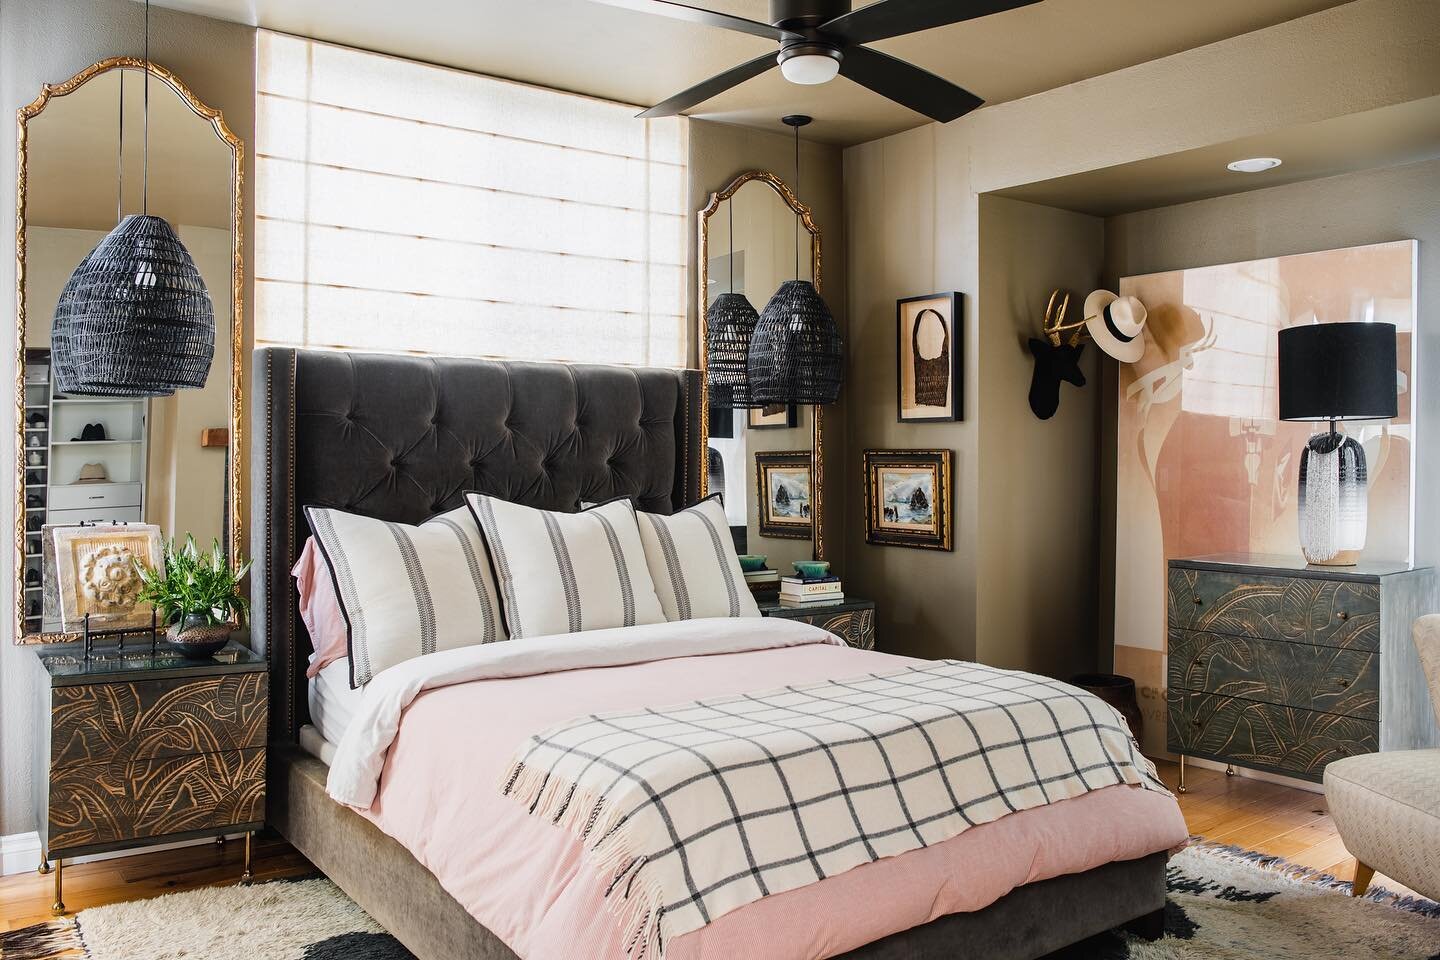 We can&rsquo;t seem to stop hitting the snooze button this AM so why not a #bedroom post? Composing of an old window, awkward nook, and a very narrow layout &mdash; this master we designed in Santa Monica was a bit of a challenge on the tight budget 